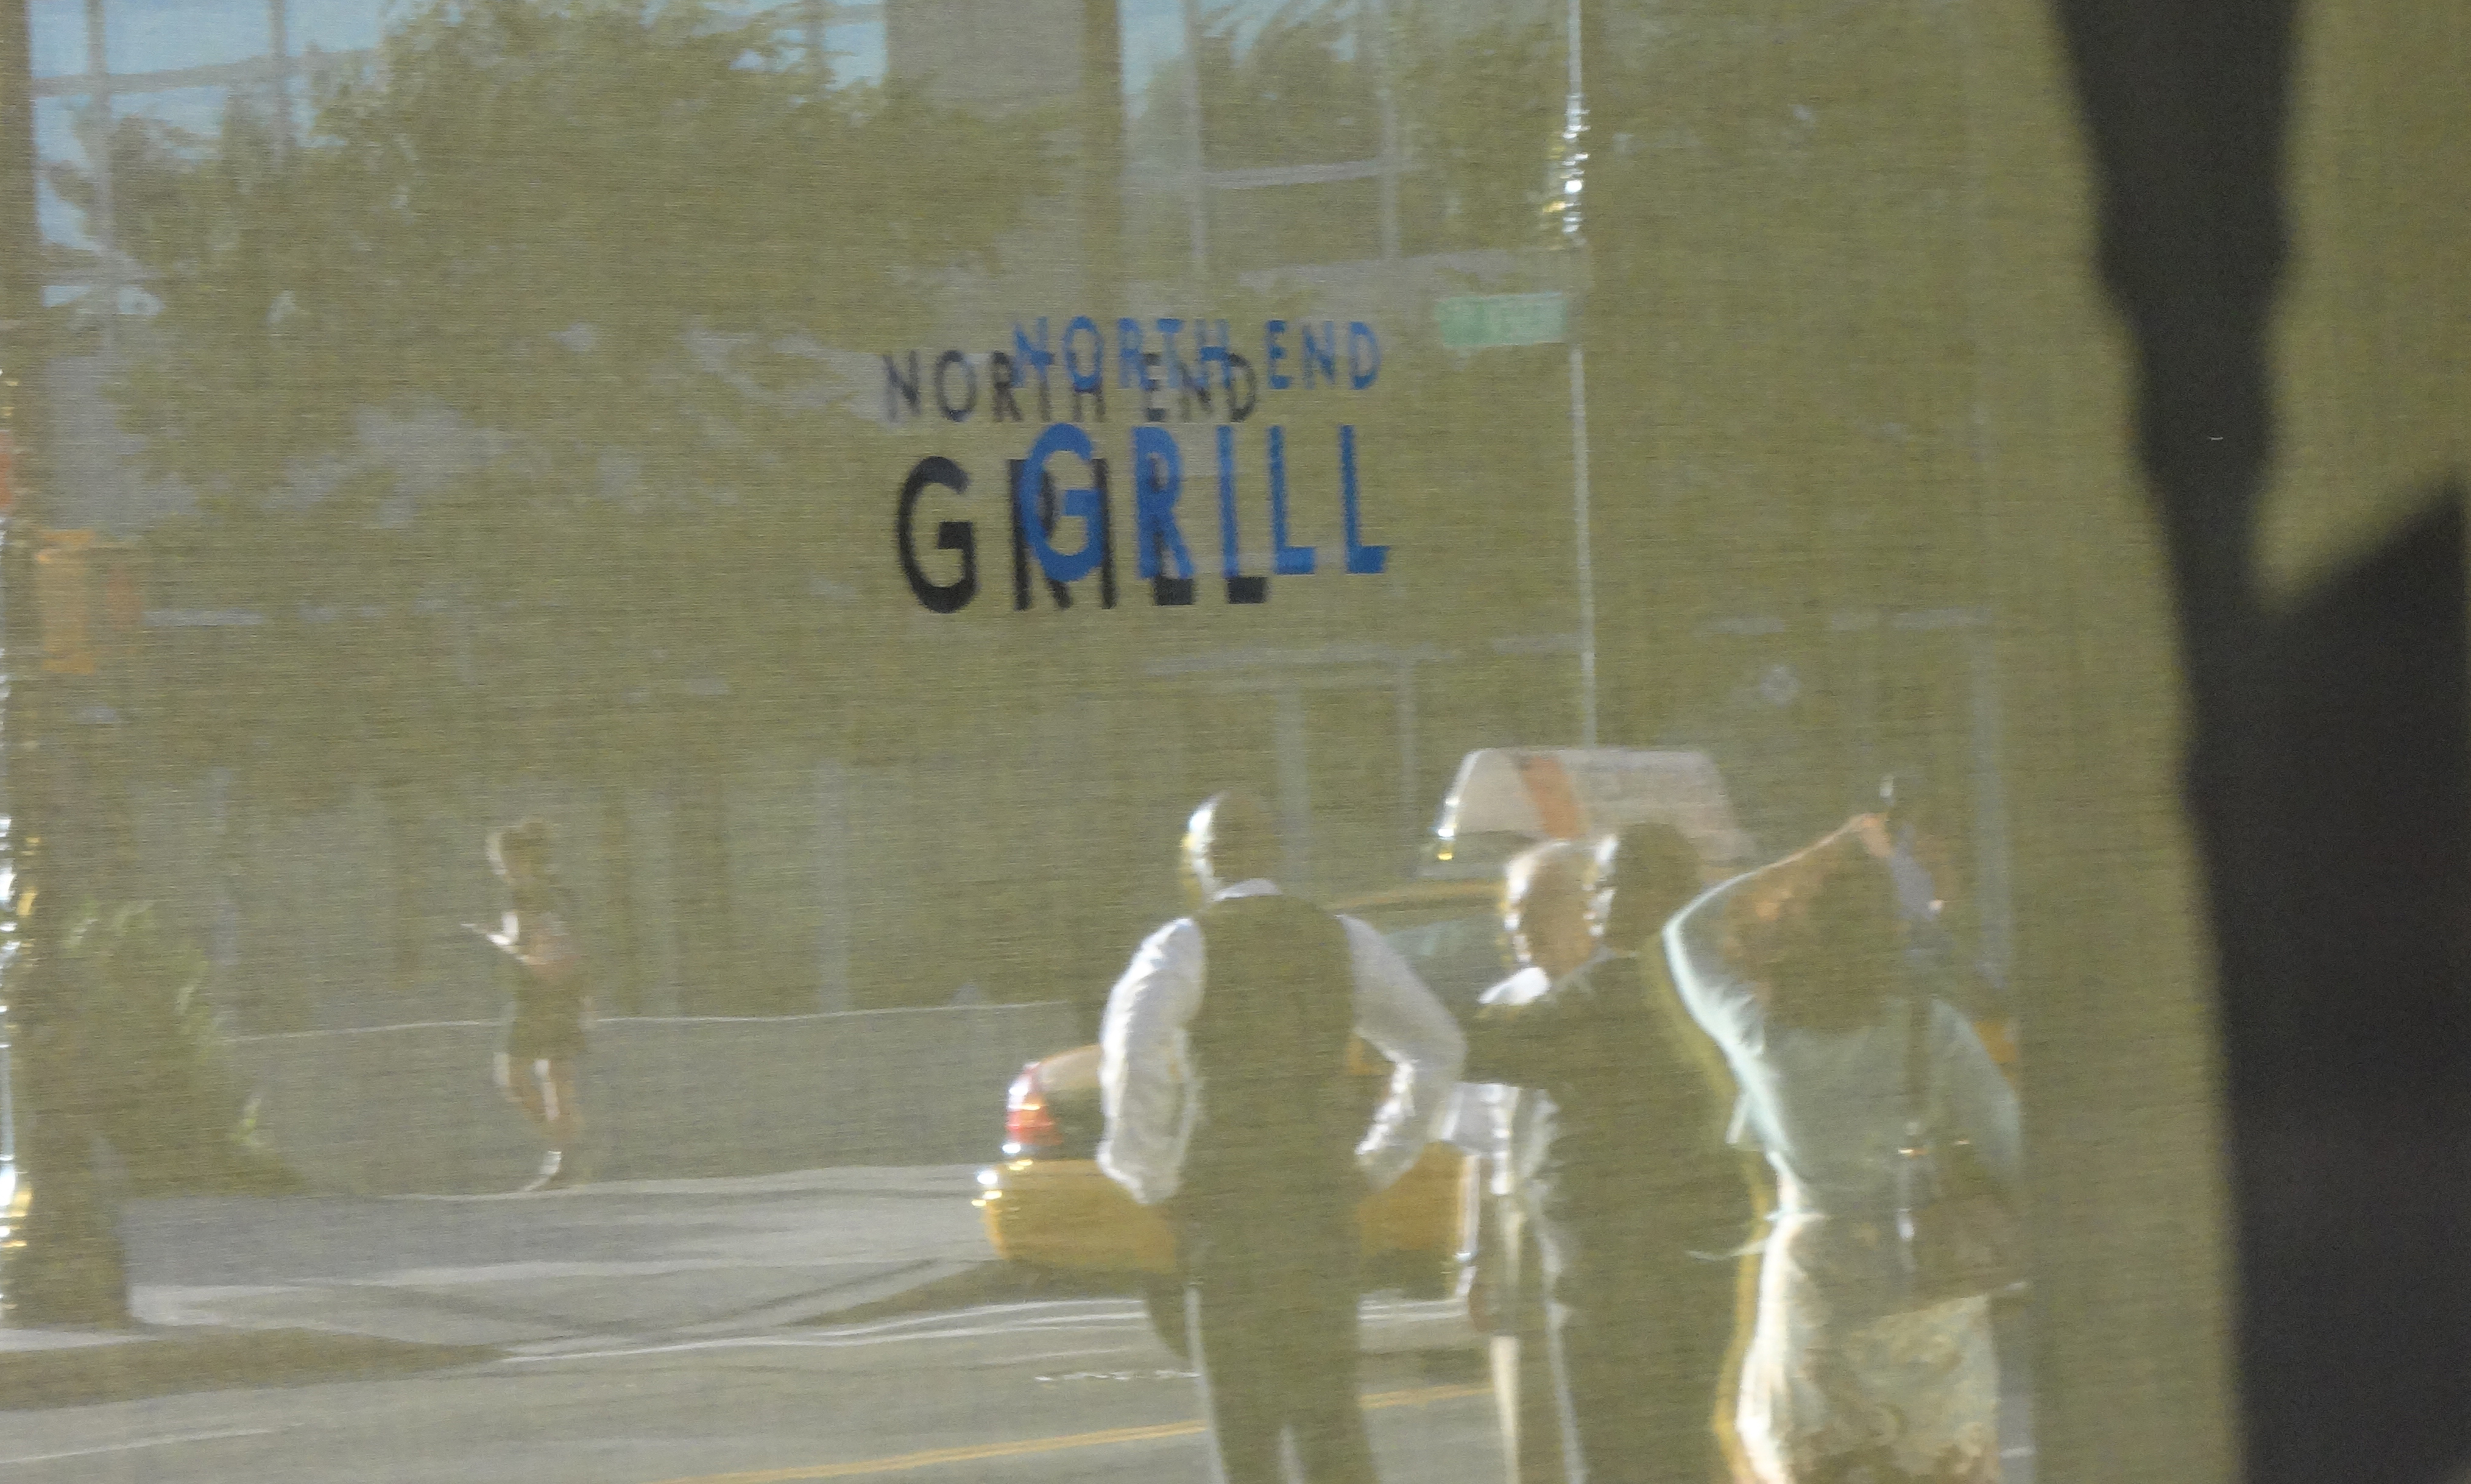 North End grill reflection